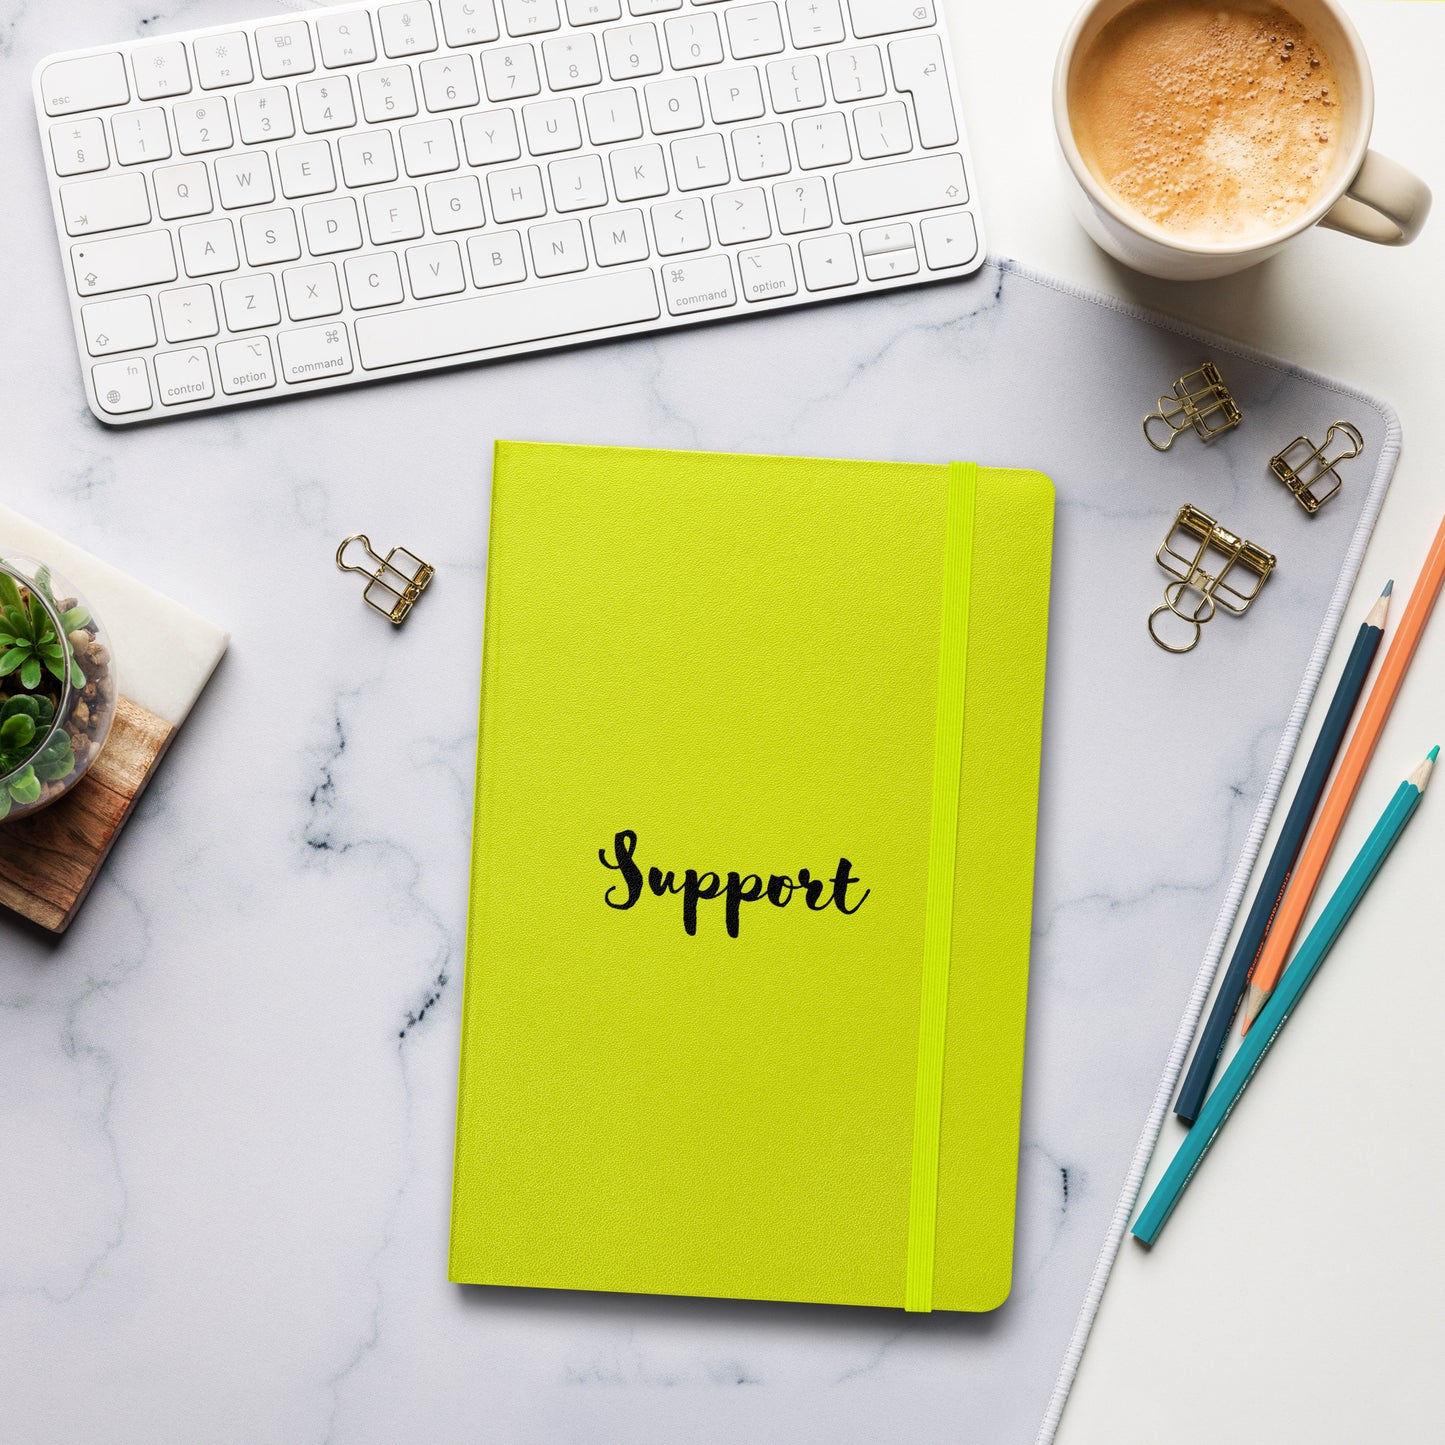 Support Hardcover bound notebook